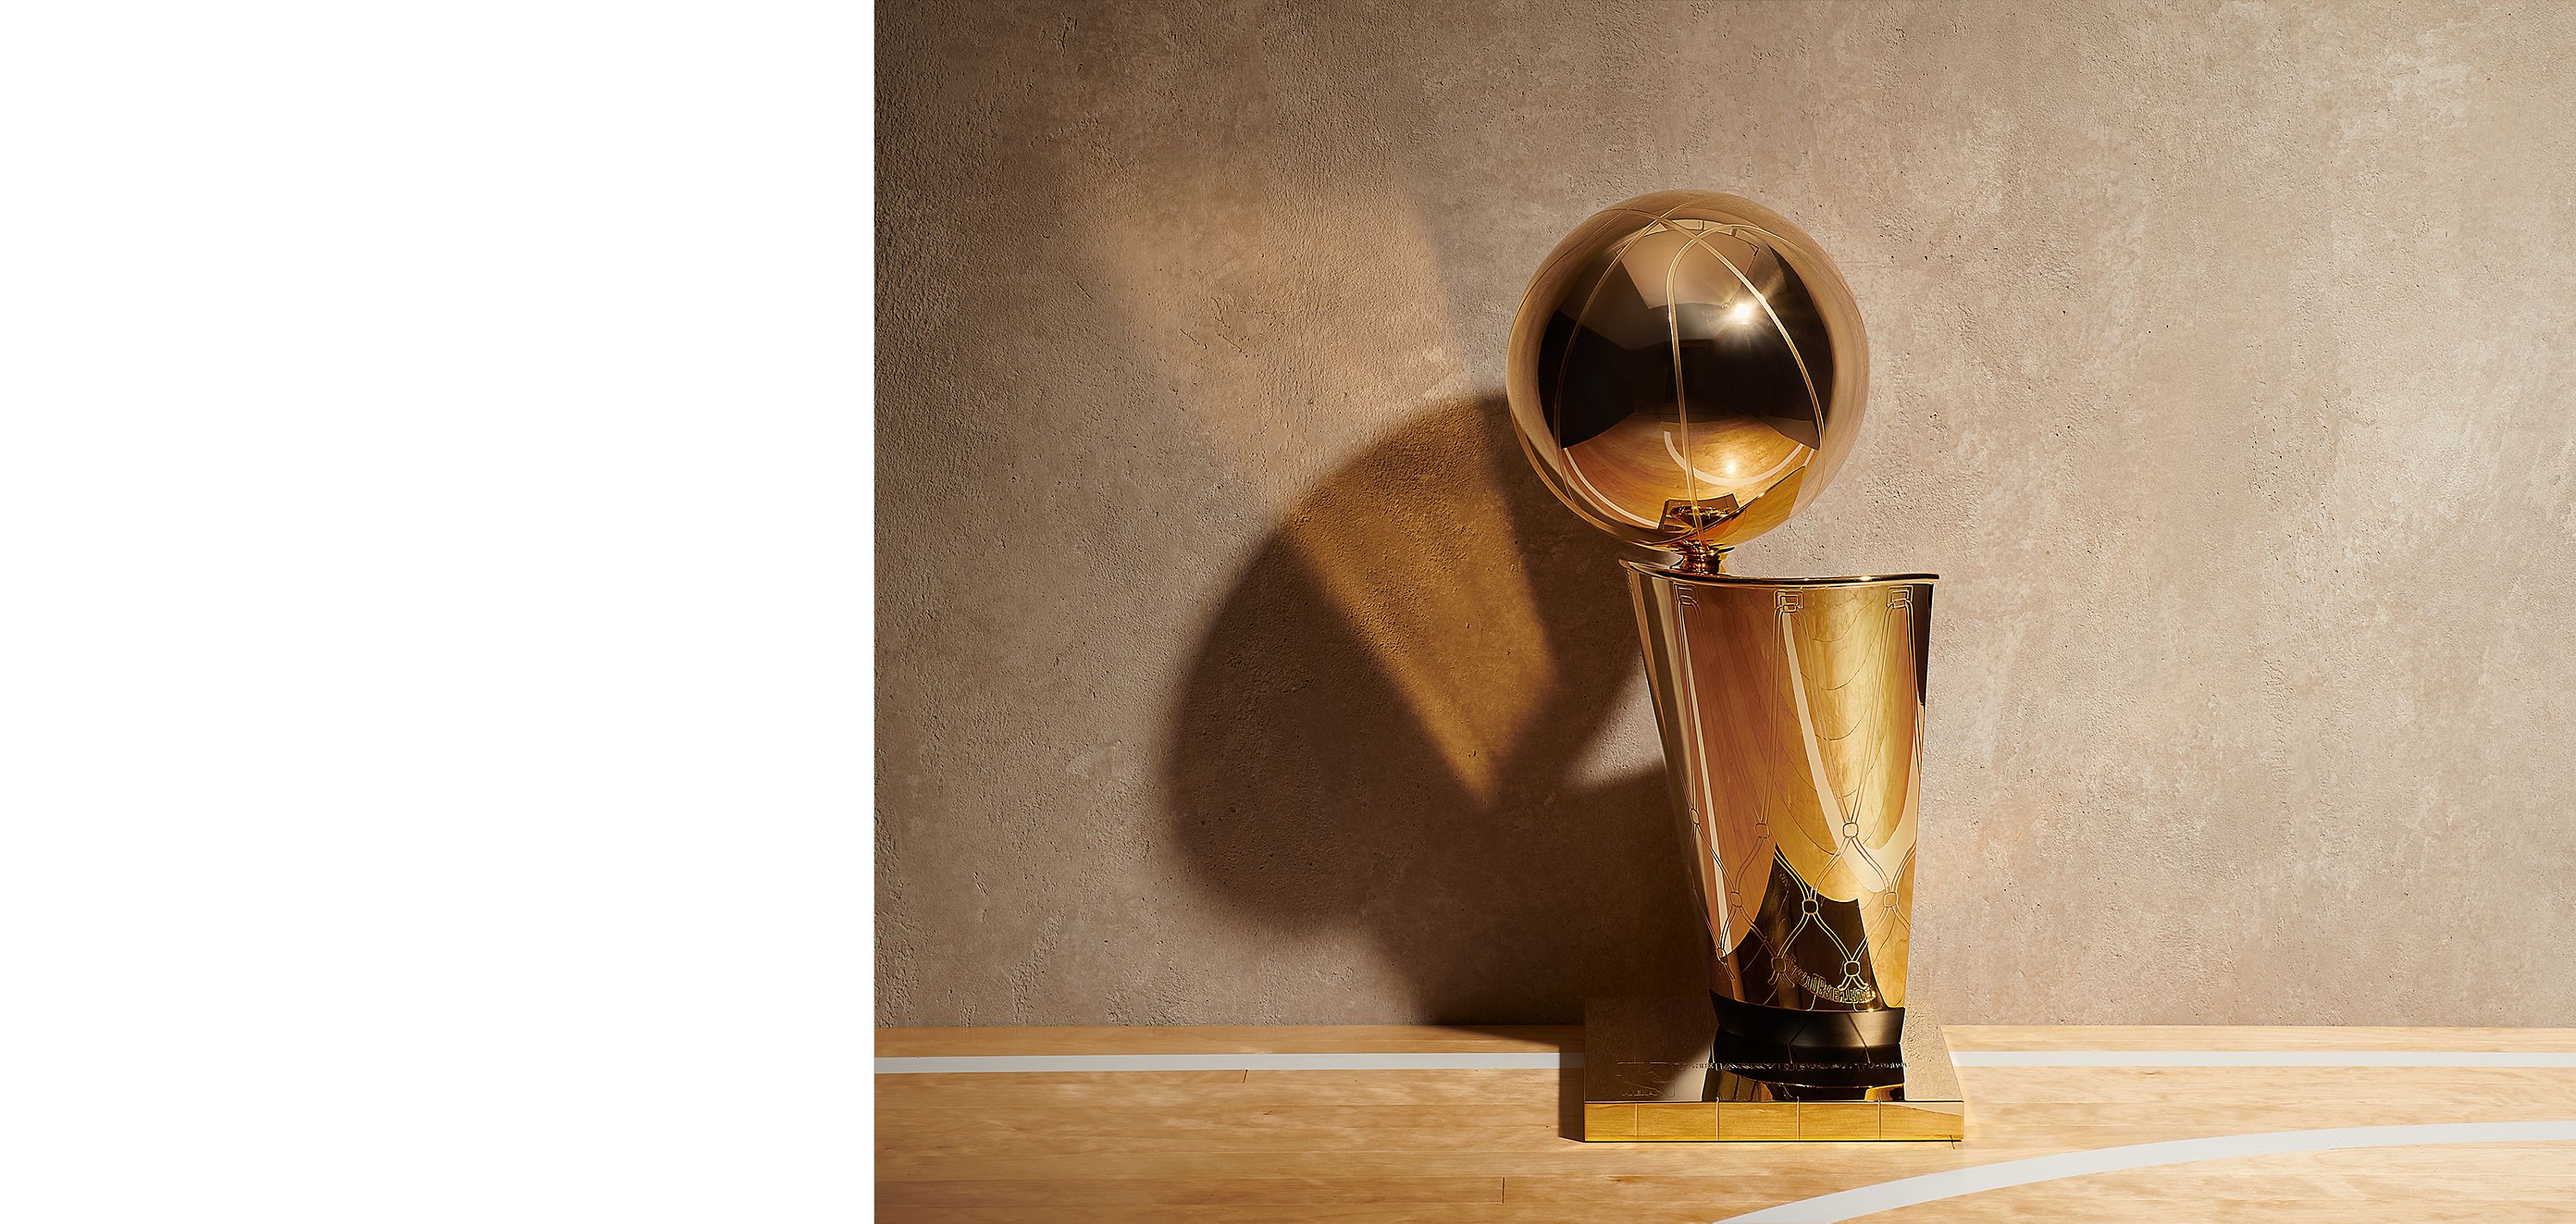 Tiffany Just Redesigned the Larry O'Brien NBA Finals Championship